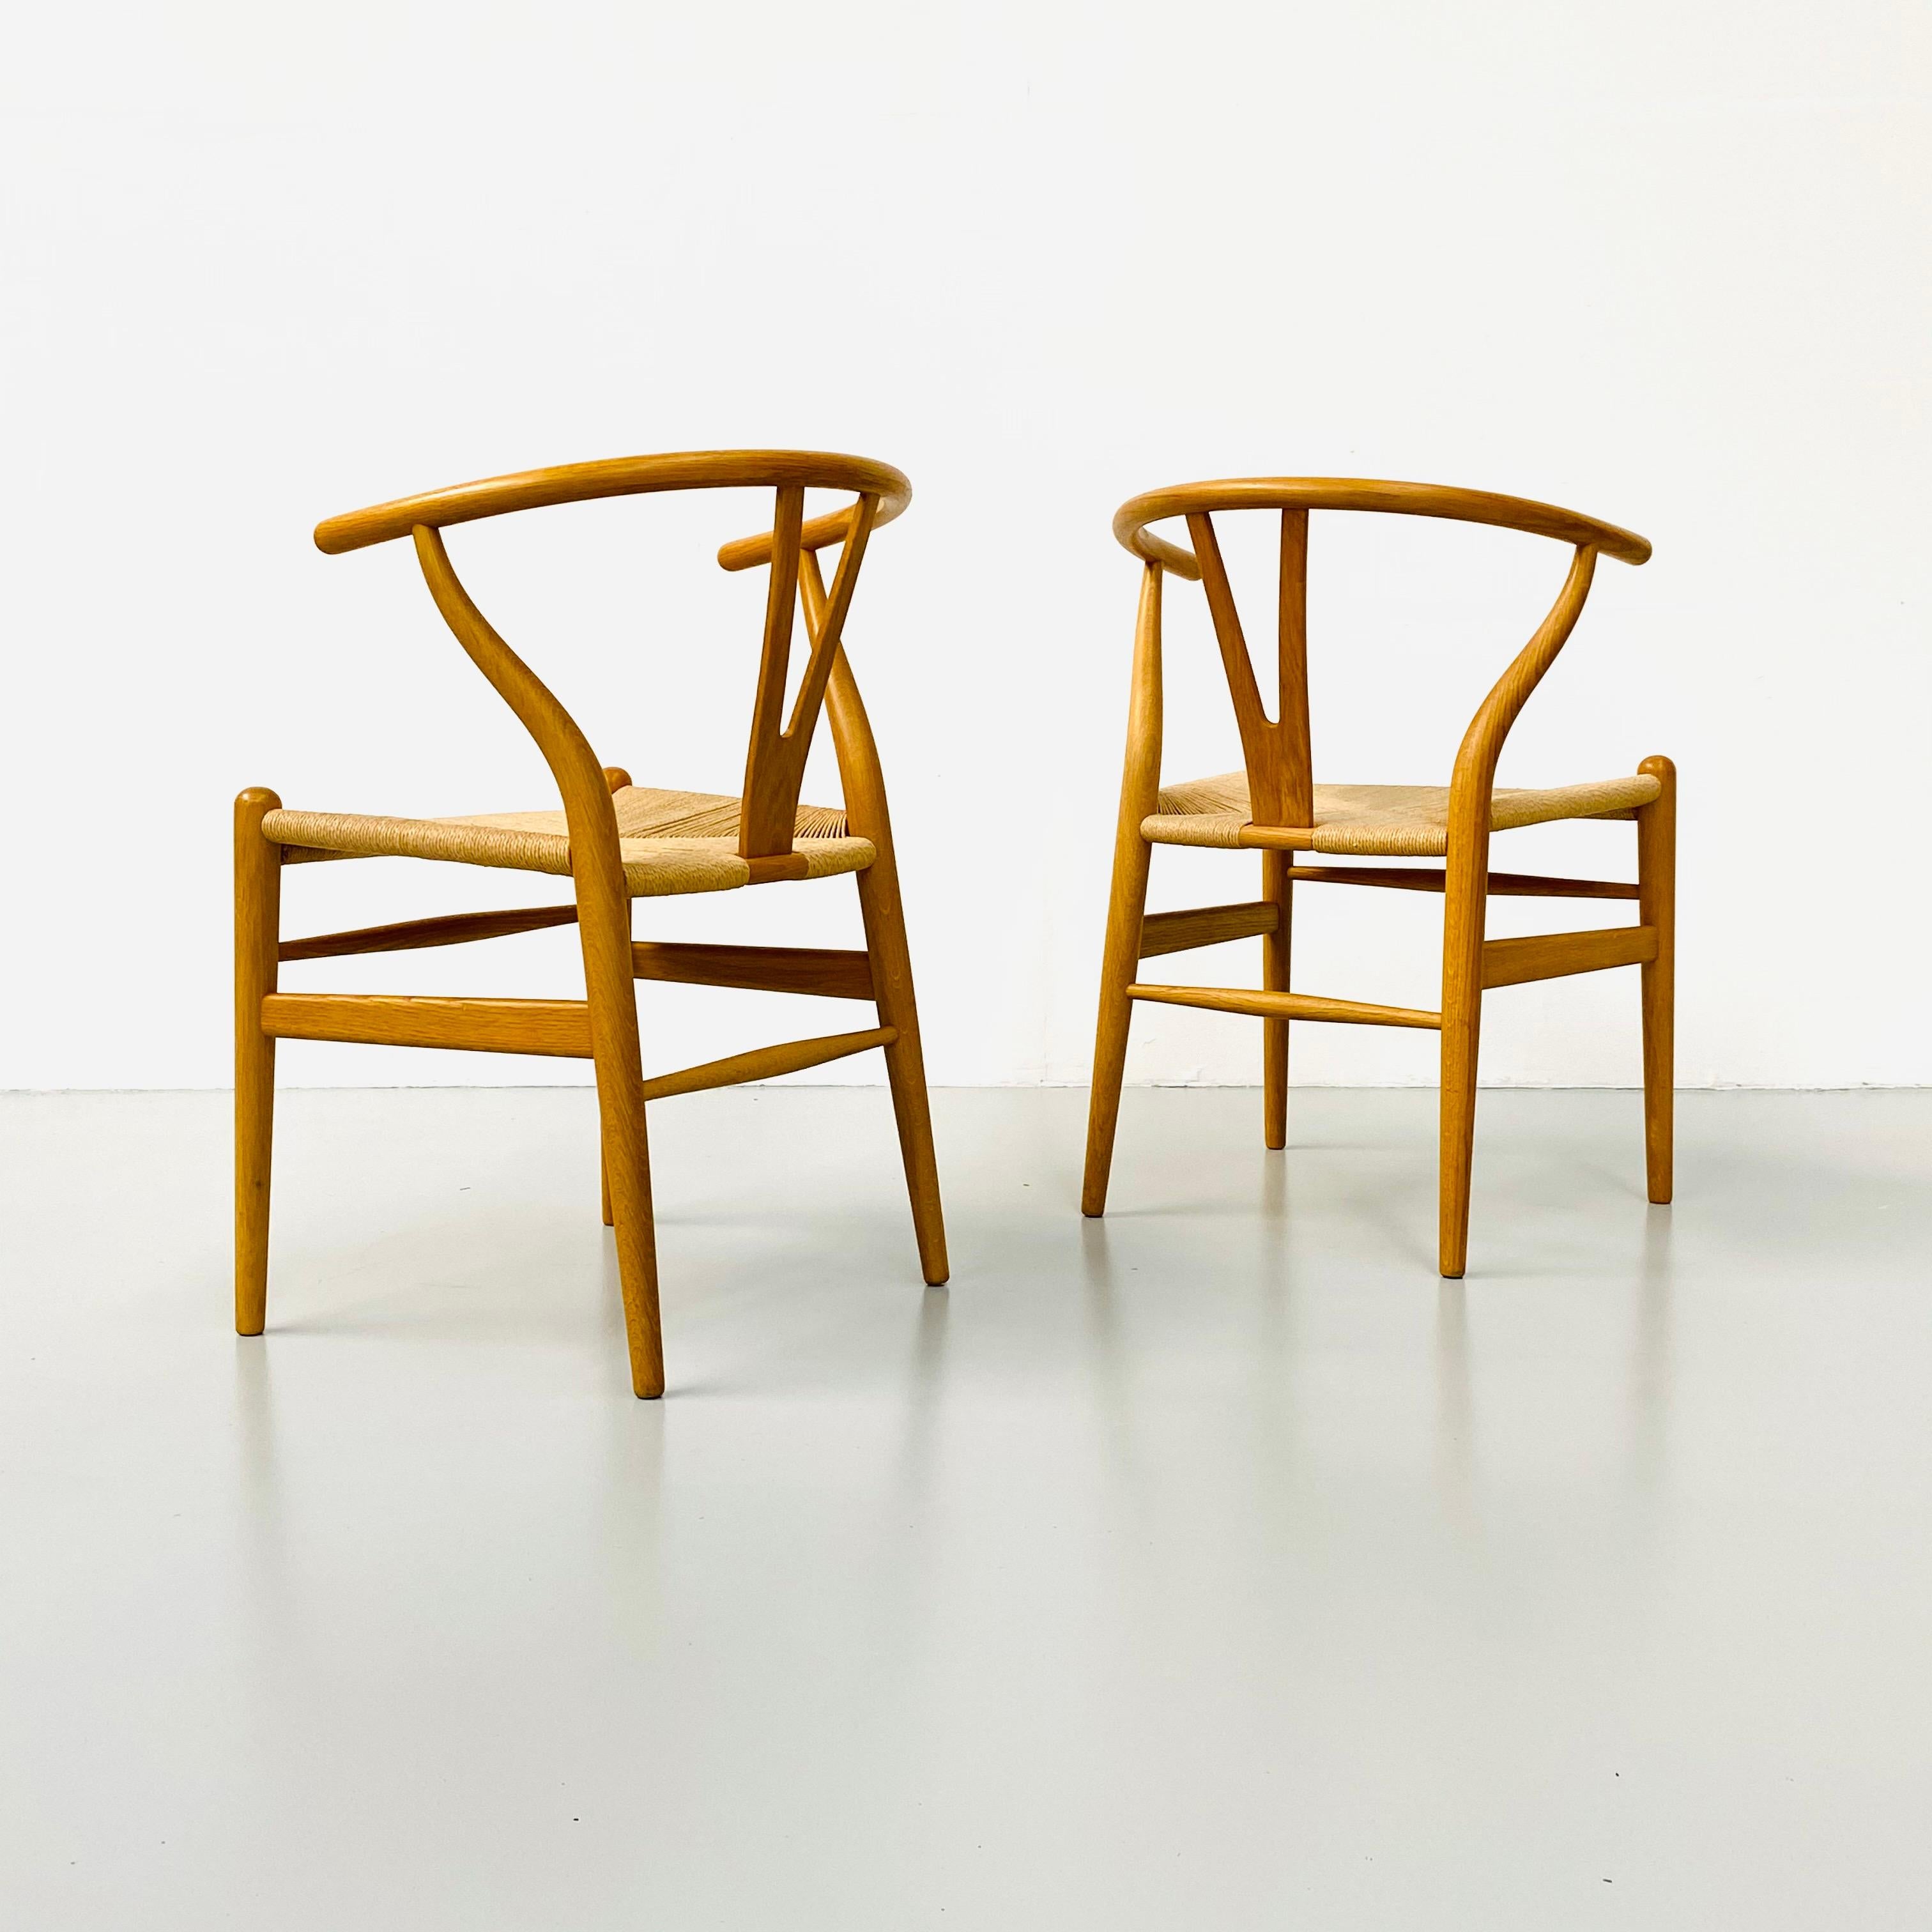 The Wishbone chair was designed in 1949 by the designer Hans J. Wegner. He designed it for the Danish company Carl Hansen & Son. These set of 2 is in very good condition and marked with a serial number to confirm its authenticity.